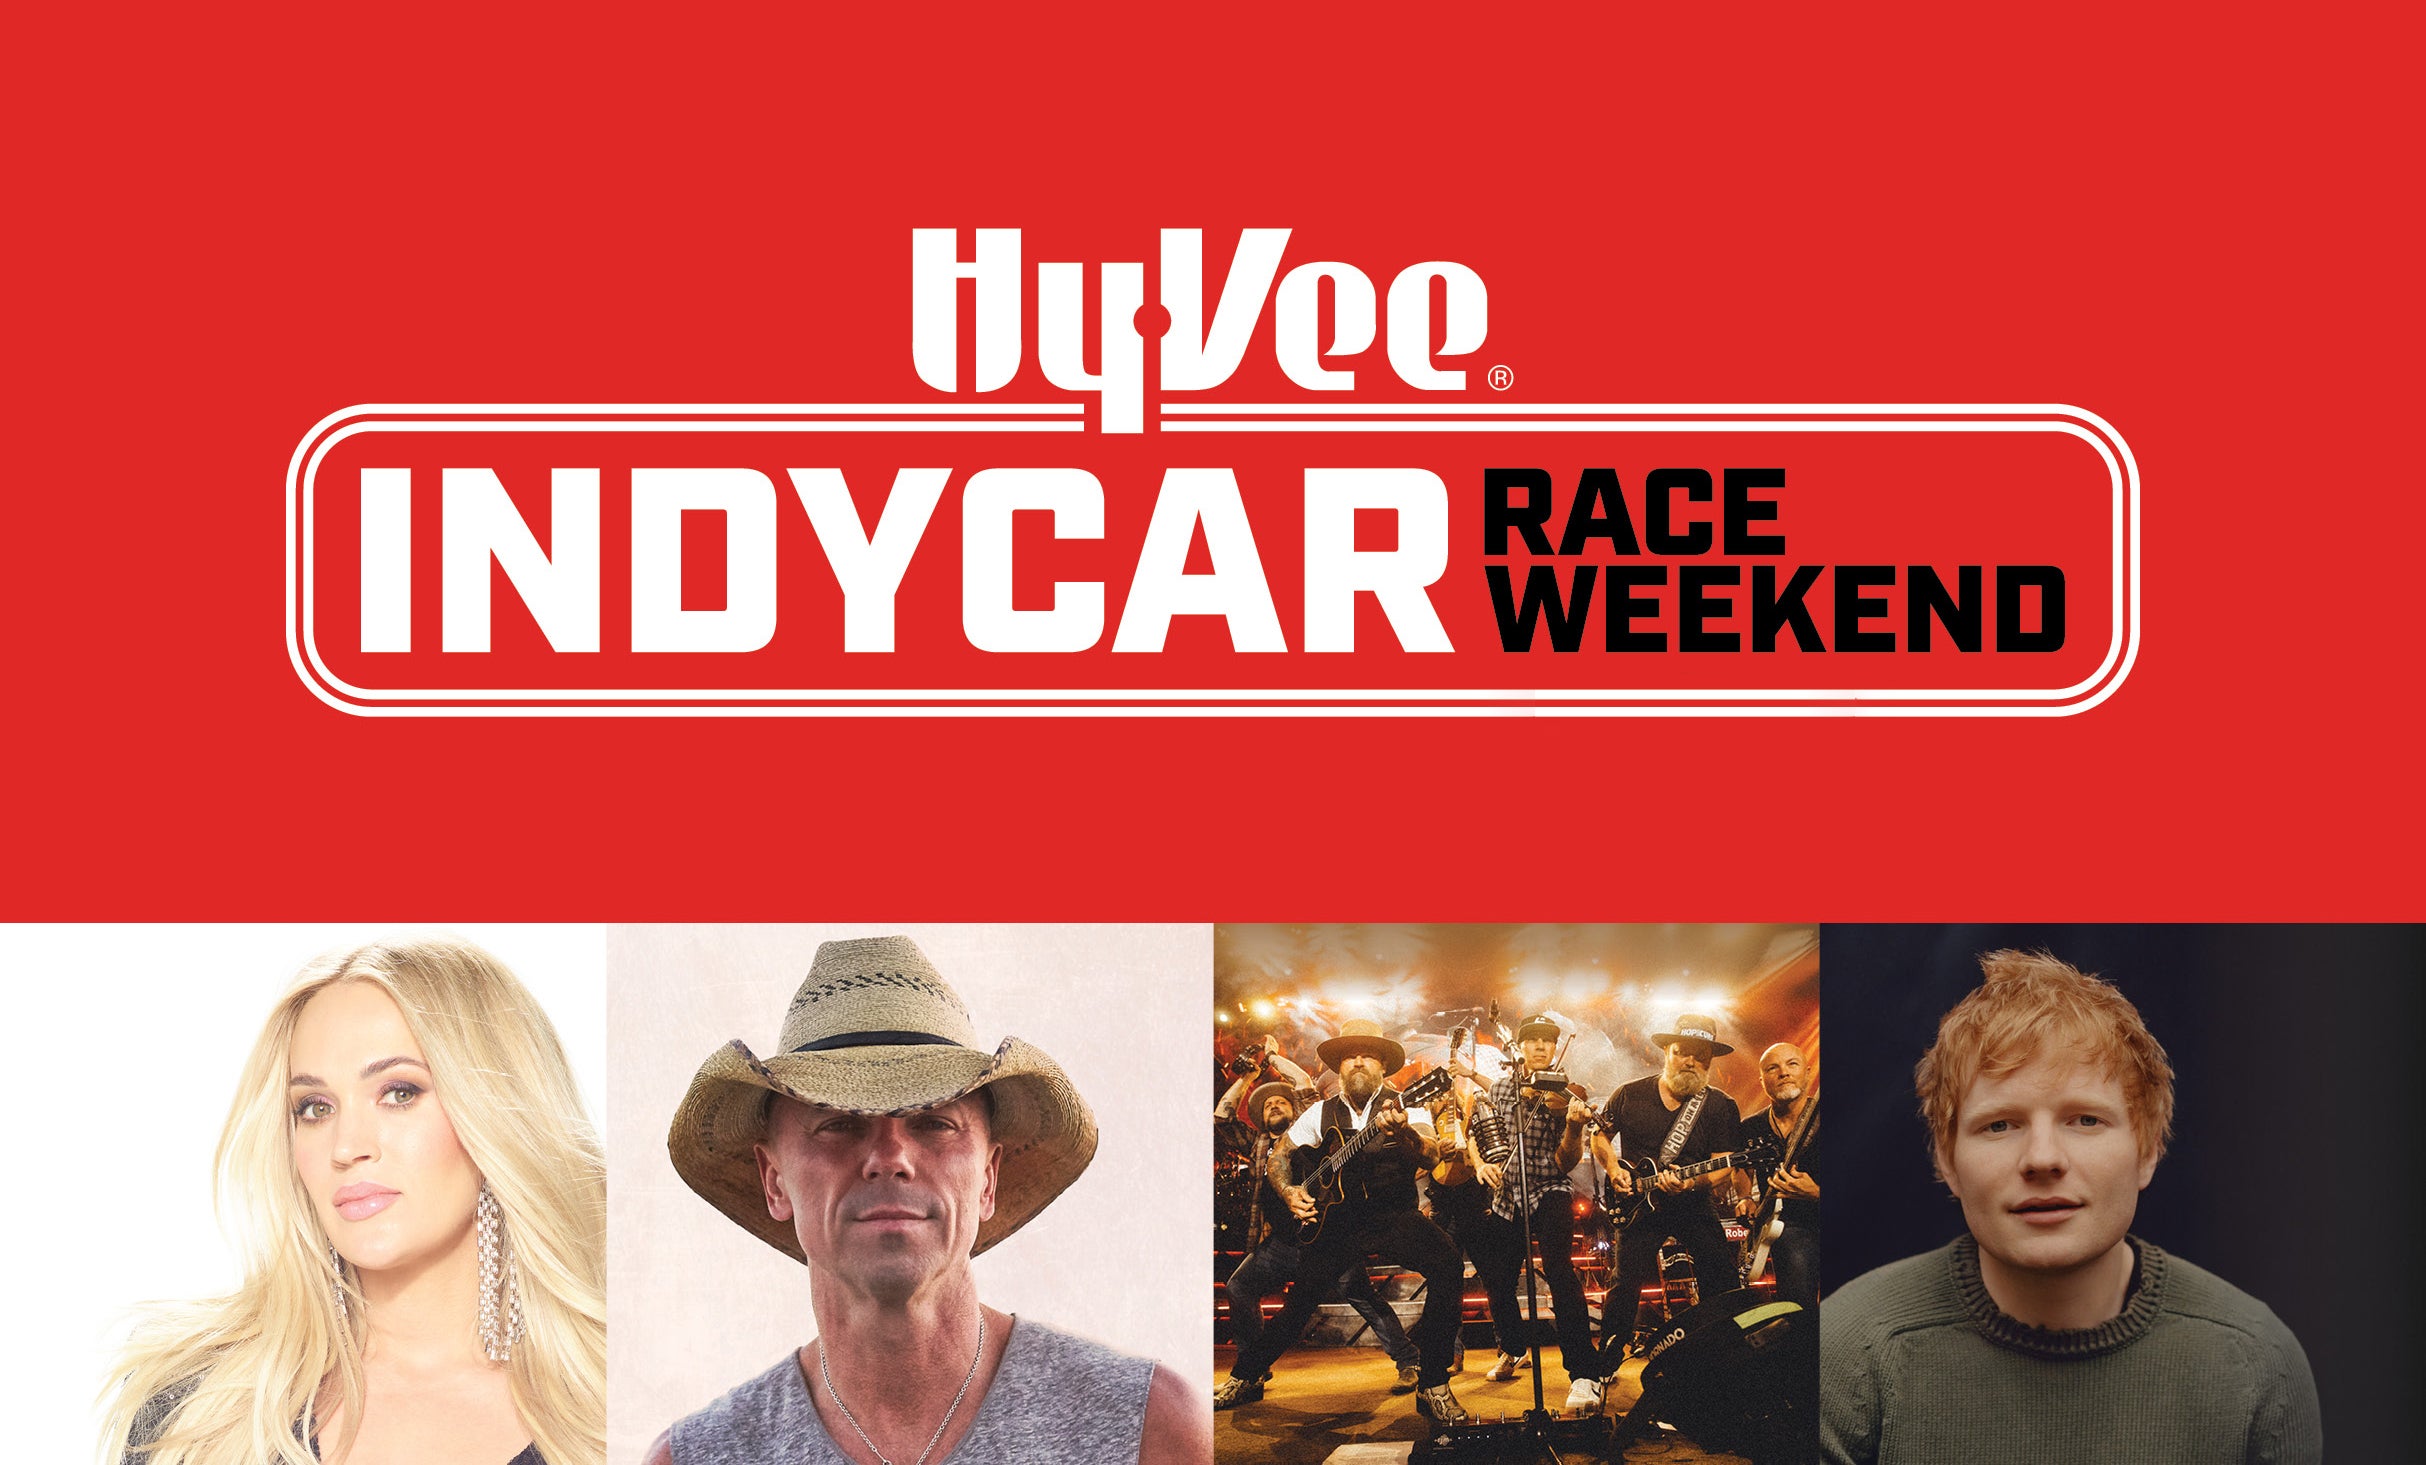 Image used with permission from Ticketmaster | 2023 Hy-Vee Indycar Weekend General Camping tickets